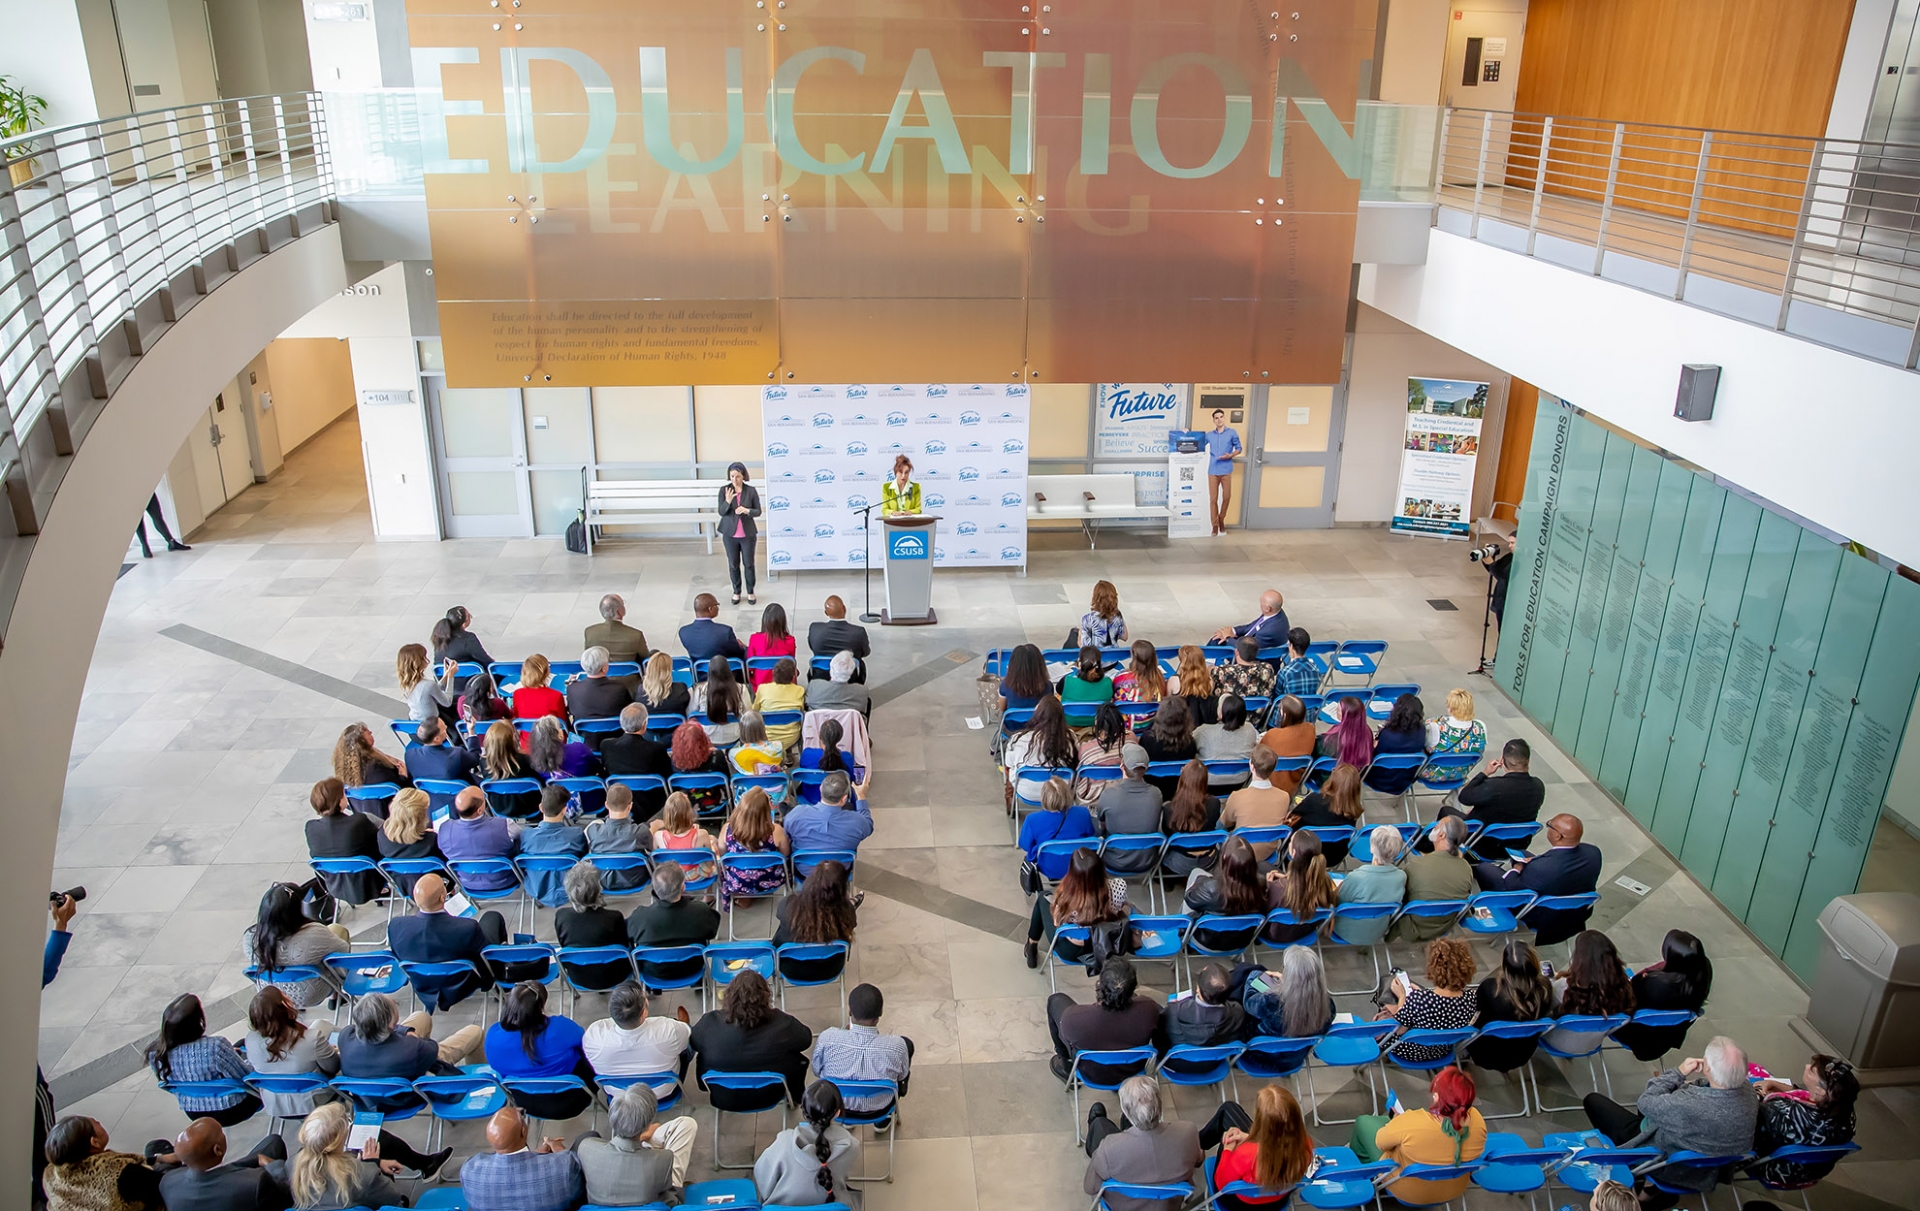 Speeches took place in the Watson College of Education atrium before the outdoor unveiling.